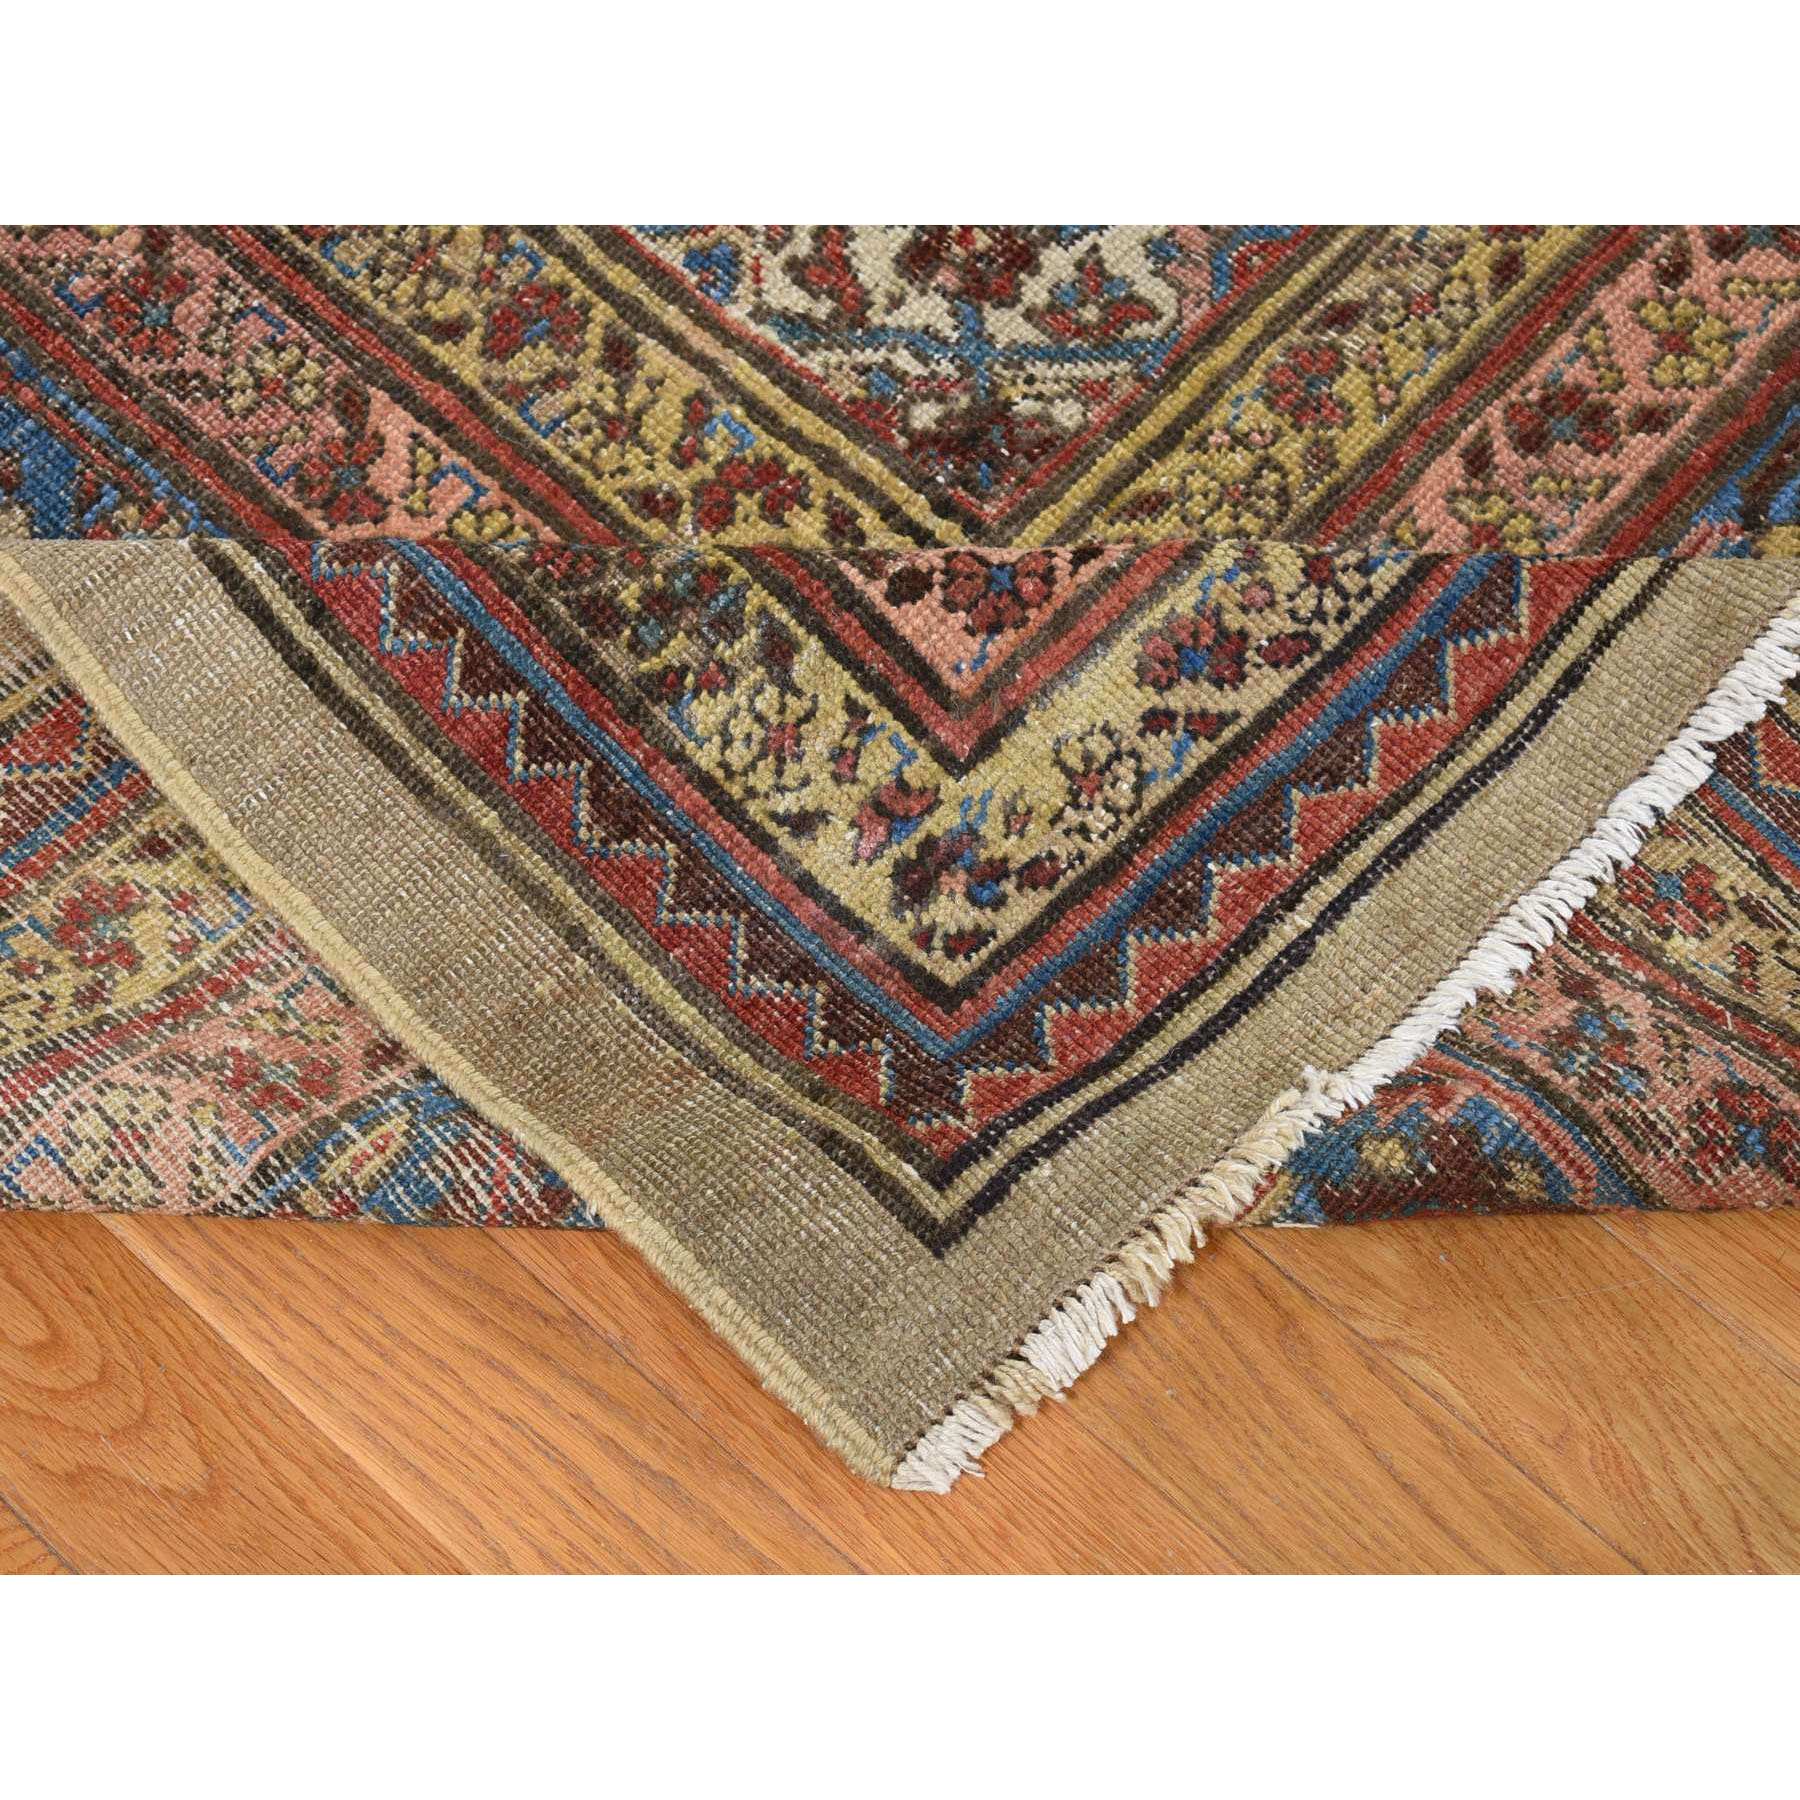 10'9"x15'9" Terracotta Red, Antique Persian Bakshaish Encored Medallion Design with Camel Hair, Hand Woven, Even Wear, Clean, Sides and Ends Professionally Secured, Oversized Oriental Rug 